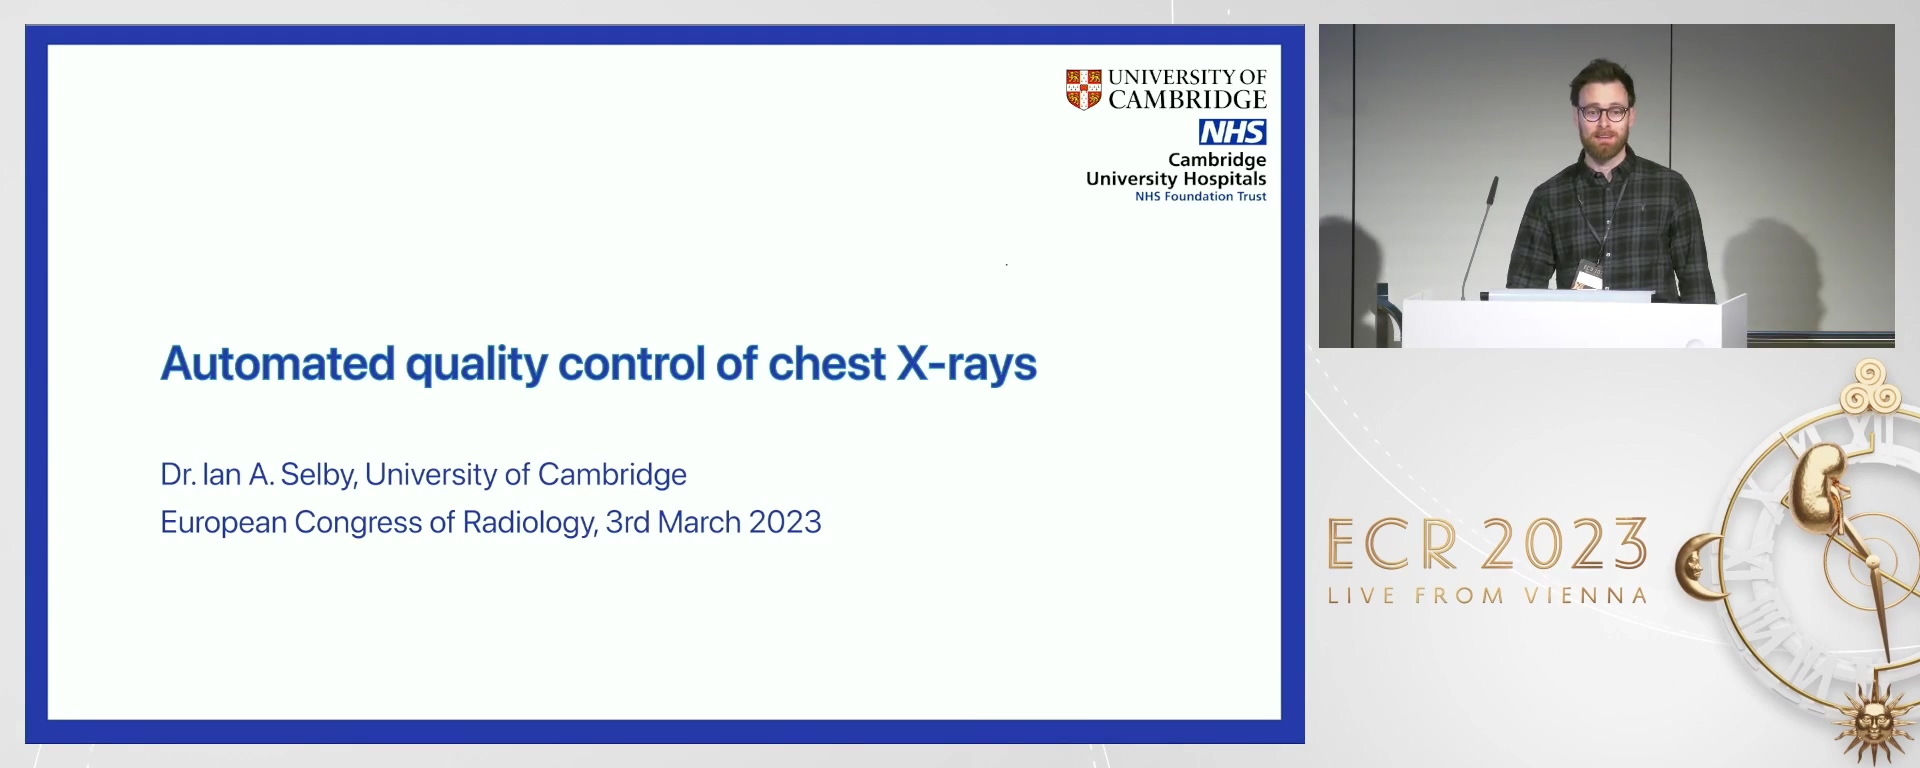 Automated quality control of chest X-rays